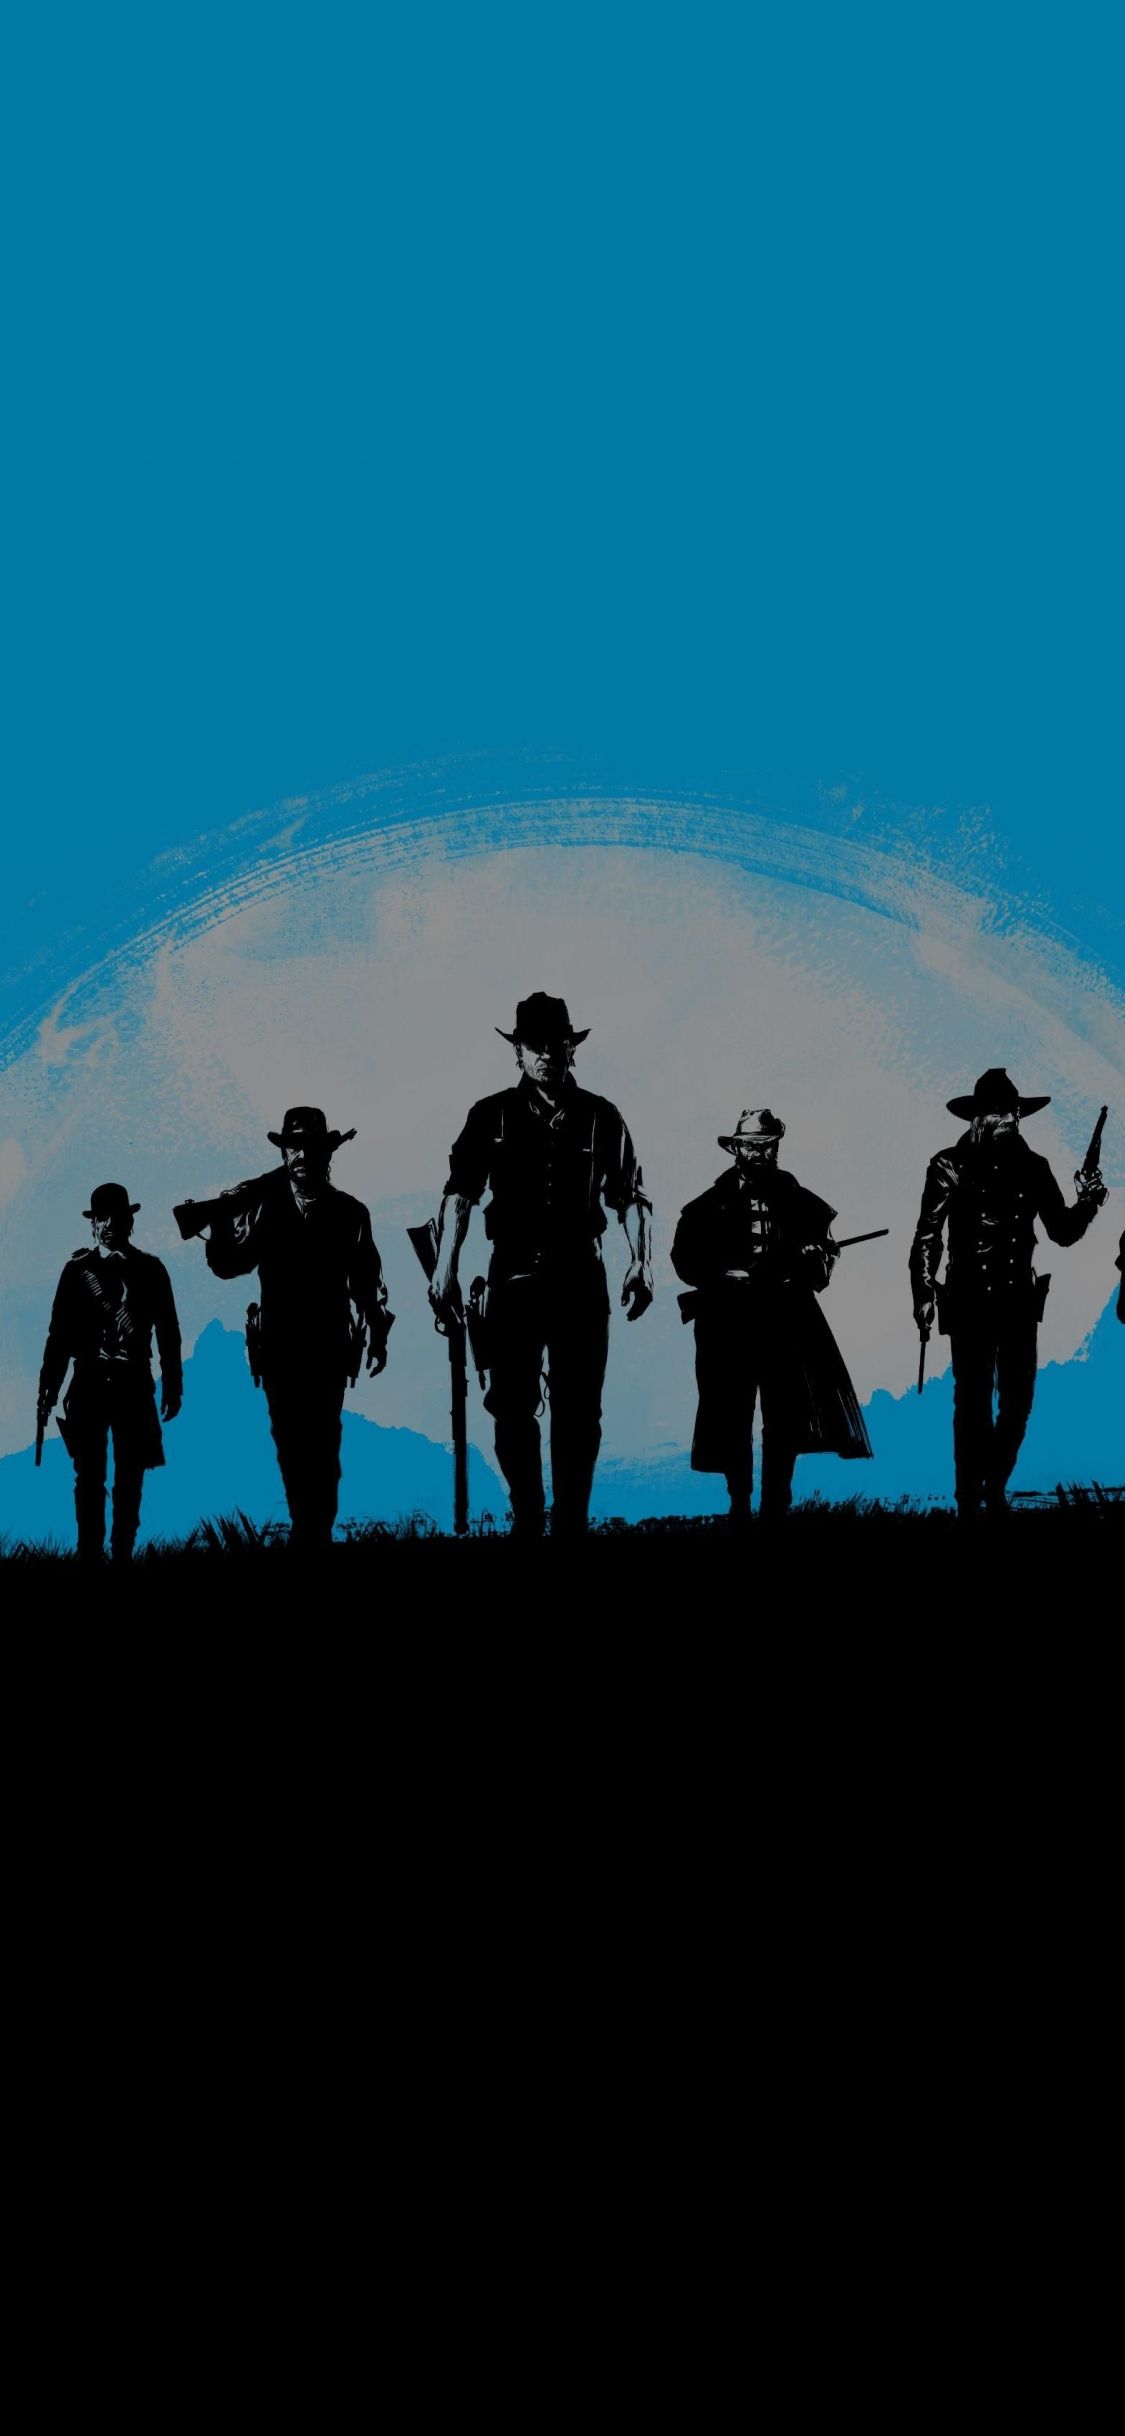 Download 1125x2436 wallpaper red dead redemption blue, poster, artwork, minimal, iphone x 1125x2436 HD image, background, 16170